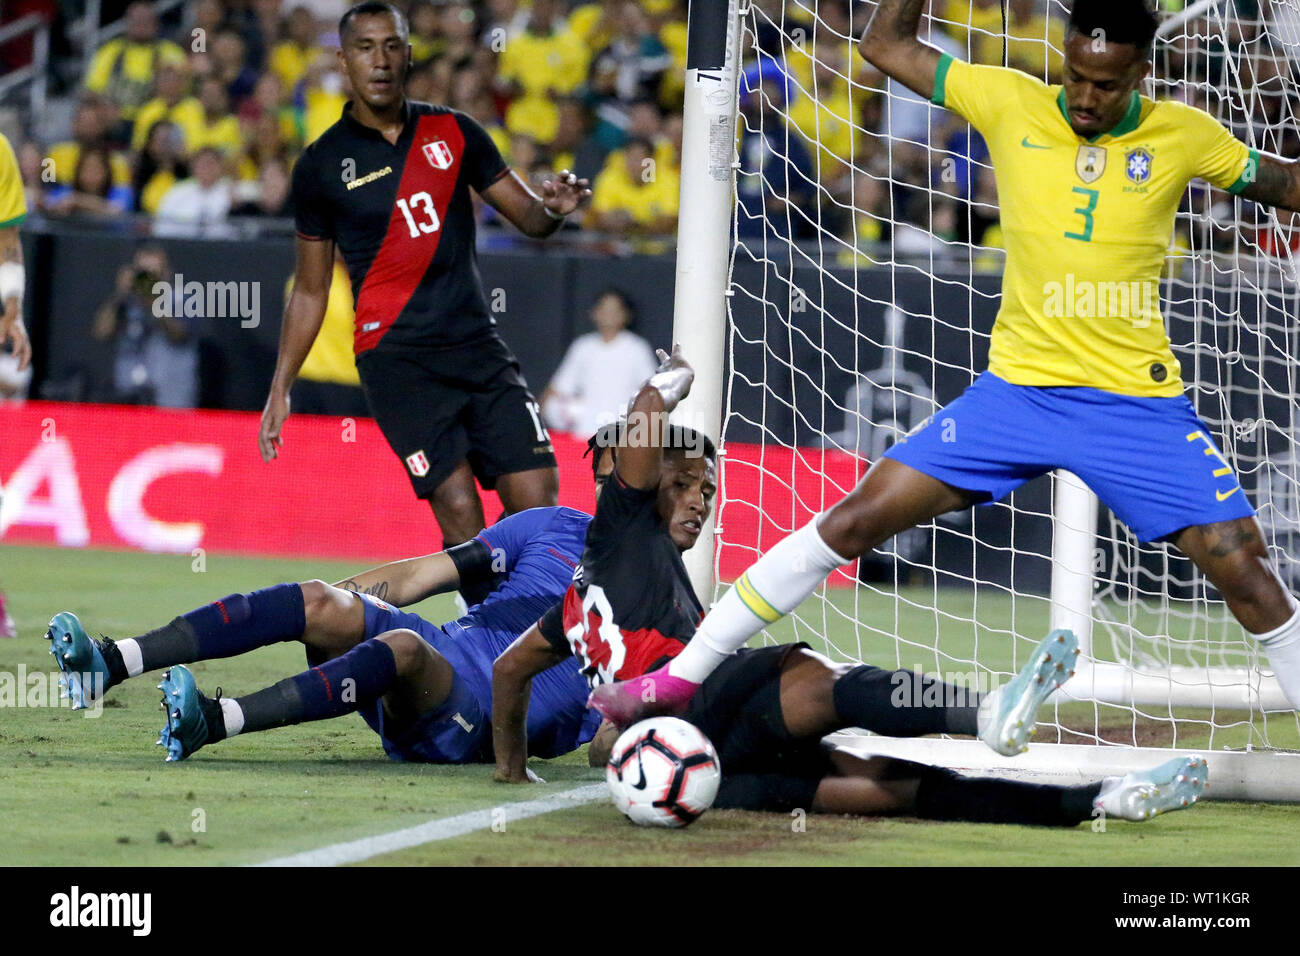 Los Angeles, California, USA. 10th Sep, 2019. Peru goalkeeper Pedro Gallese (1) and Peru midfielder Pedro Aquino (23) make save against Brazil defender Eder Militao (3) during an International Friendly Soccer match between Brazil and Peru at the Los Angeles Memorial Coliseum in Los Angeles on Tuesday, September 10, 2019. Credit: Ringo Chiu/ZUMA Wire/Alamy Live News Stock Photo